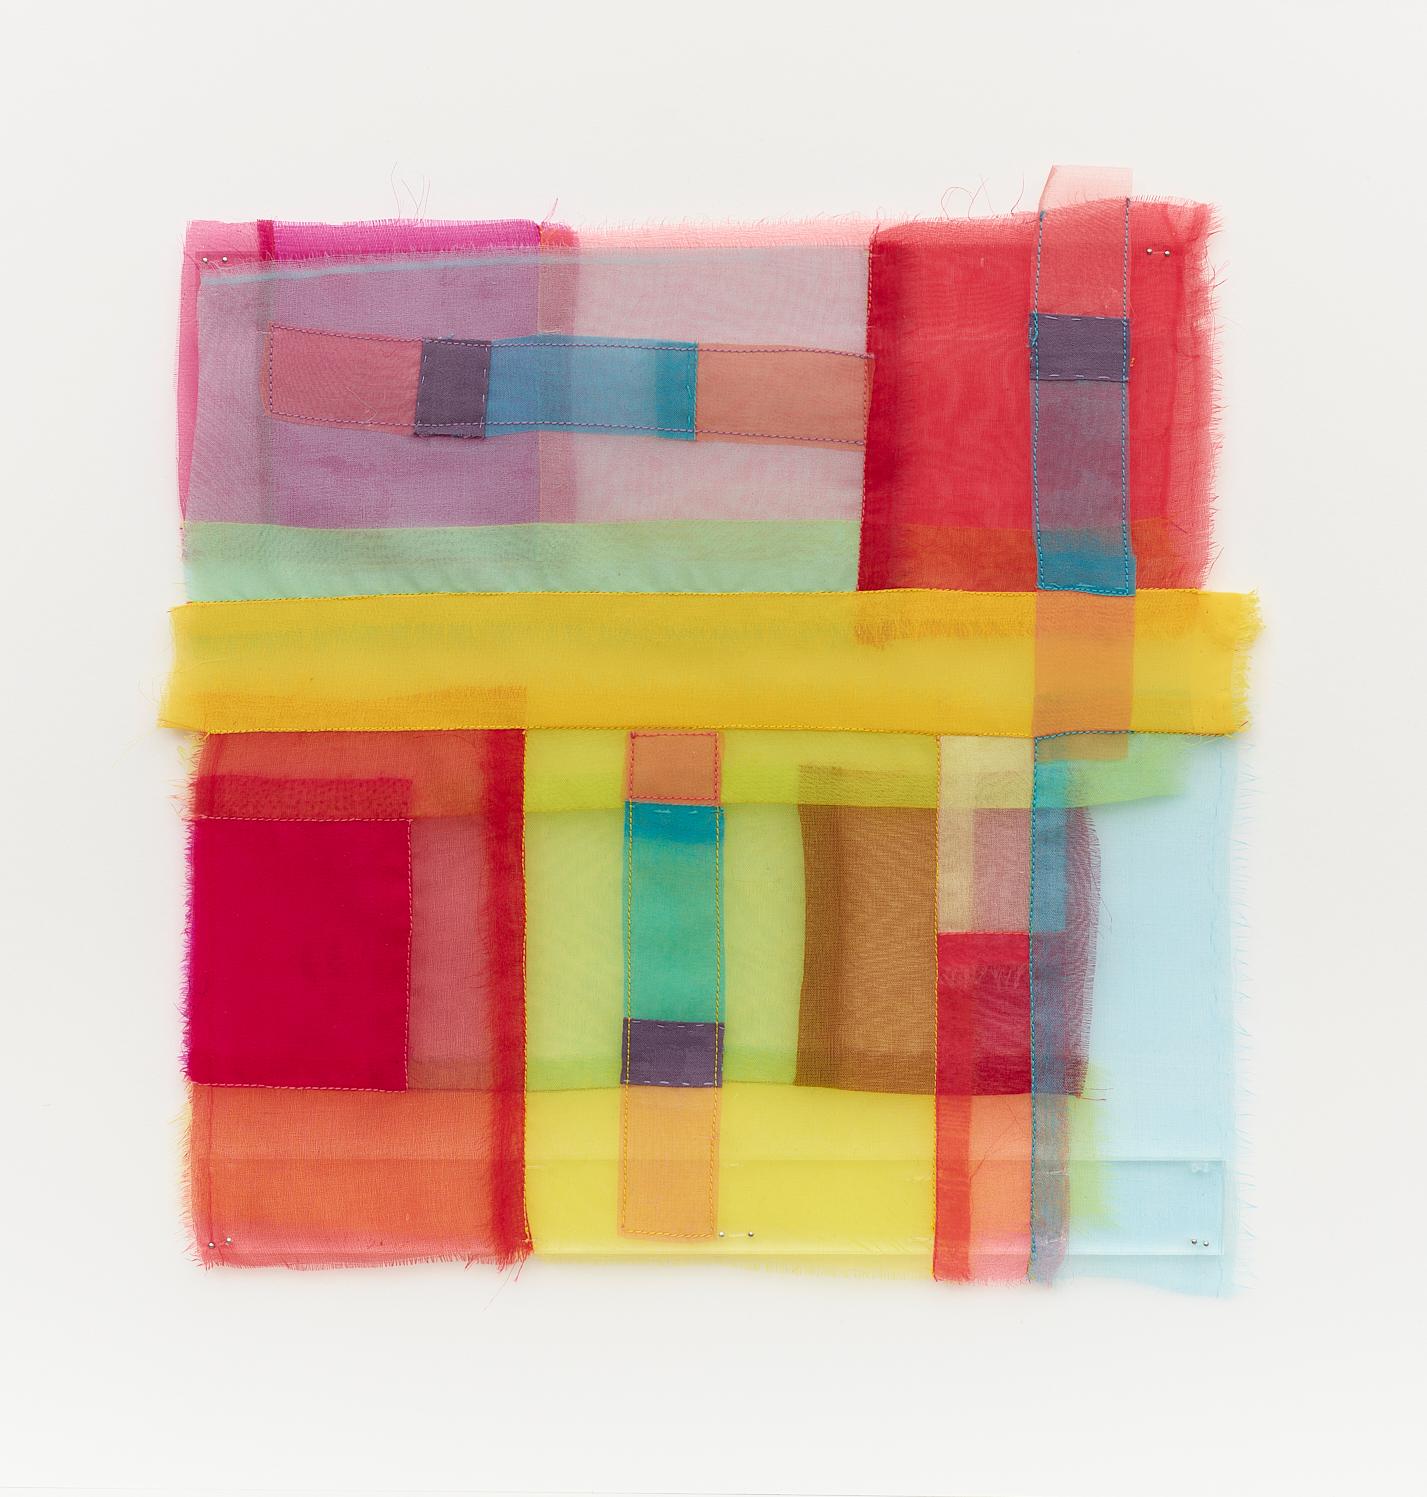 Linda Schmidt Abstract Sculpture - Untitled (0381), 2021 fabric, thread, pins, plastic, colorful, abstract collage 